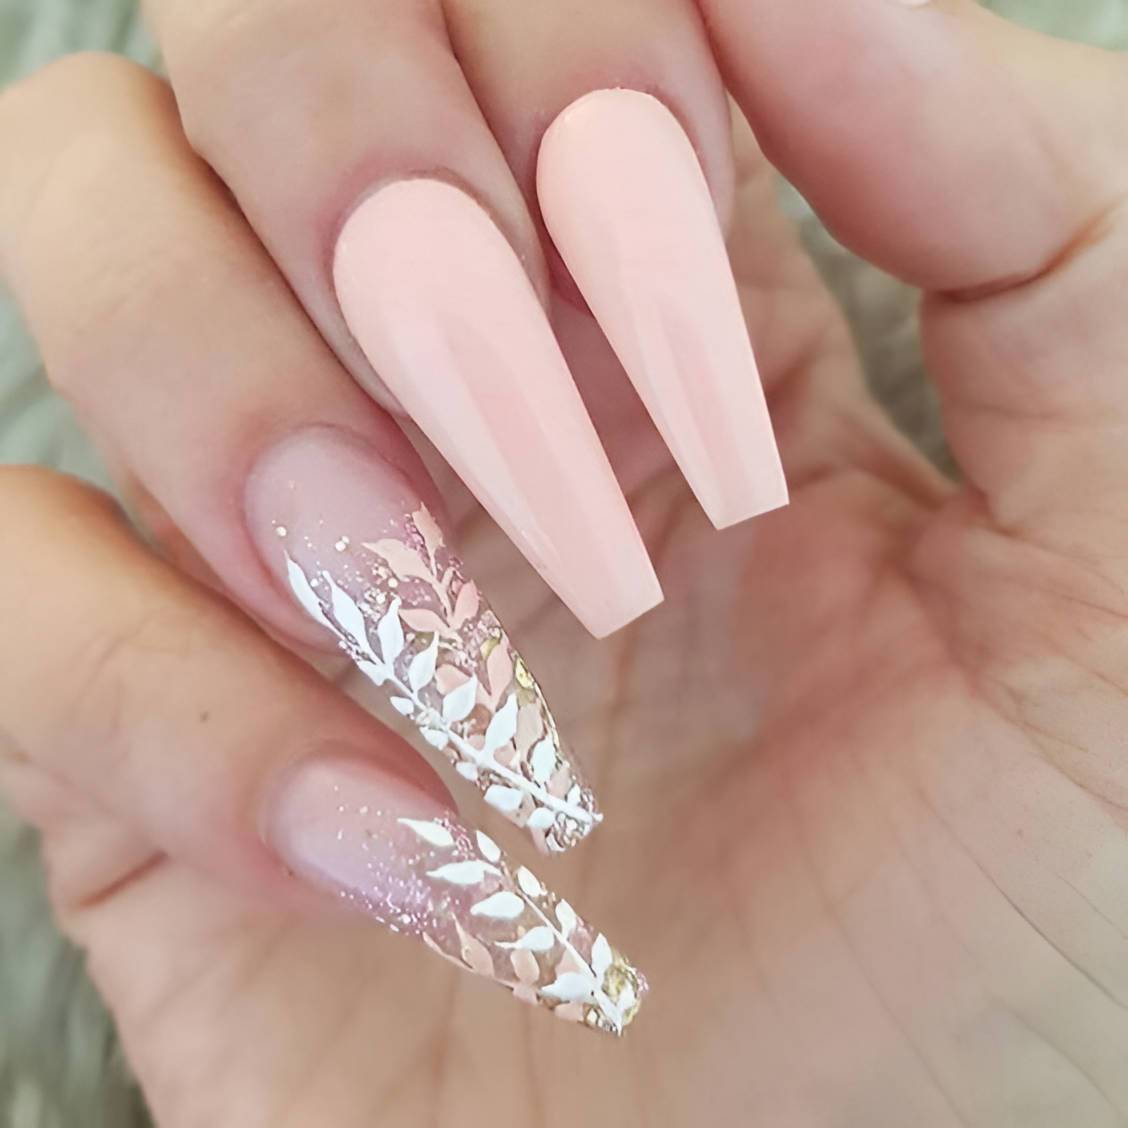 30 Stunning Square Nail Designs To Vamp Up Your Manicure Game - 209